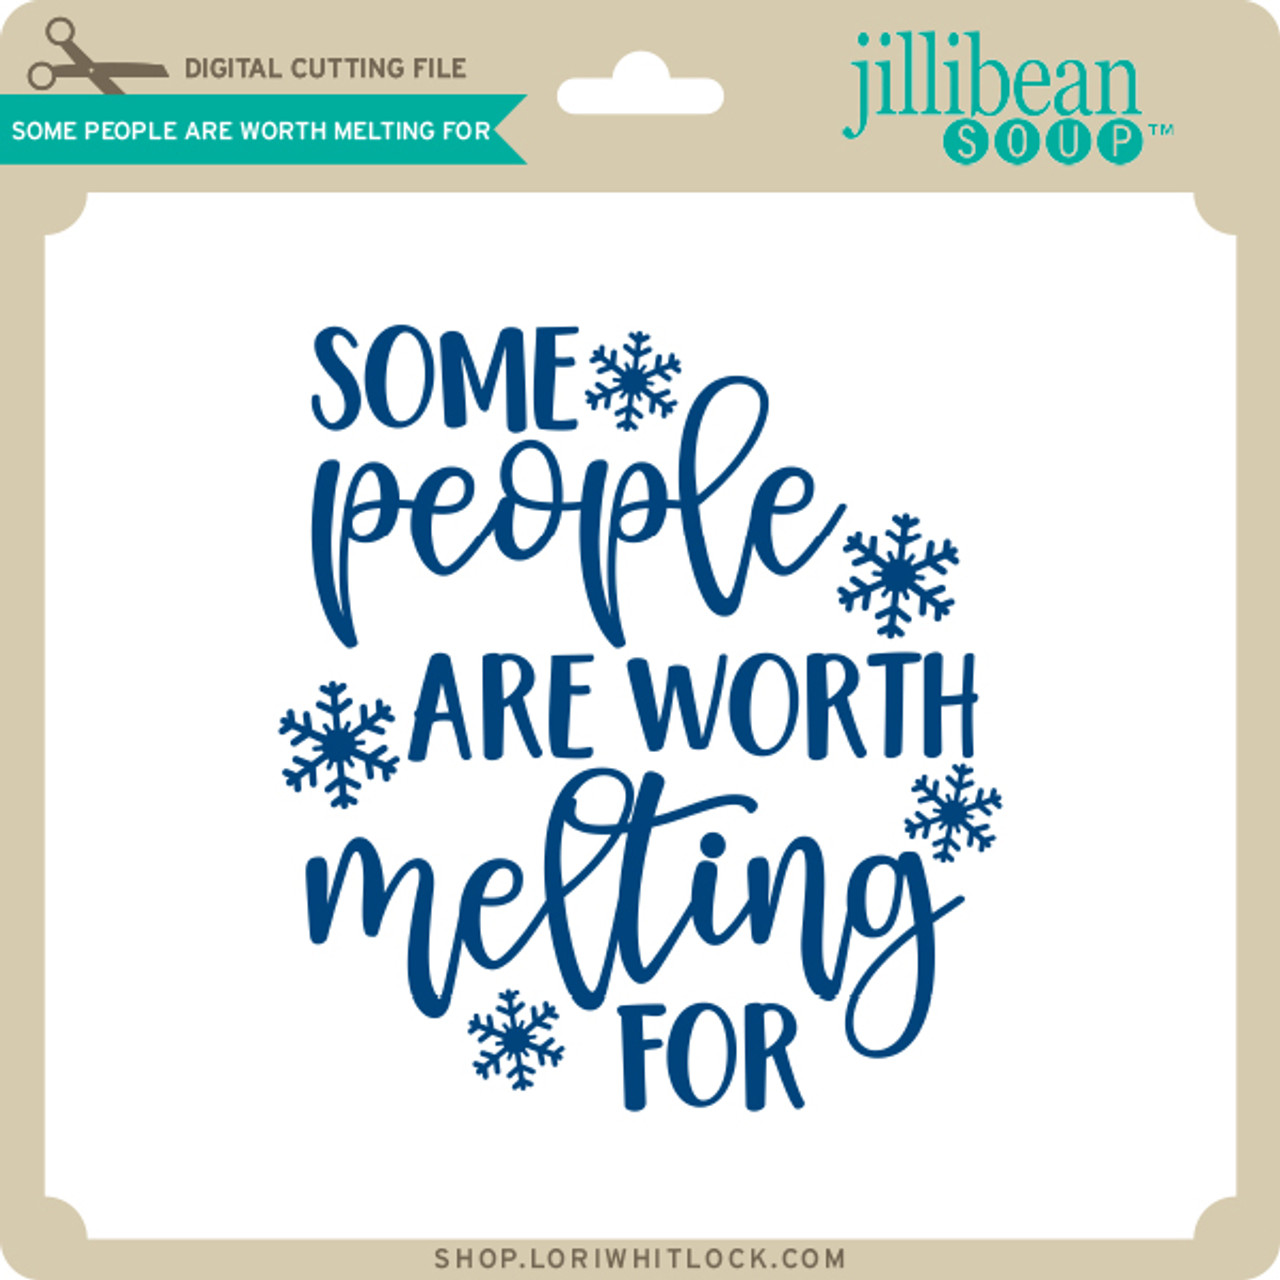 https://cdn11.bigcommerce.com/s-zlf3iiy2/images/stencil/1280x1280/products/17234/19079/JB-Some-People-are-Worth-Melting-For__42378.1604965540.jpg?c=2